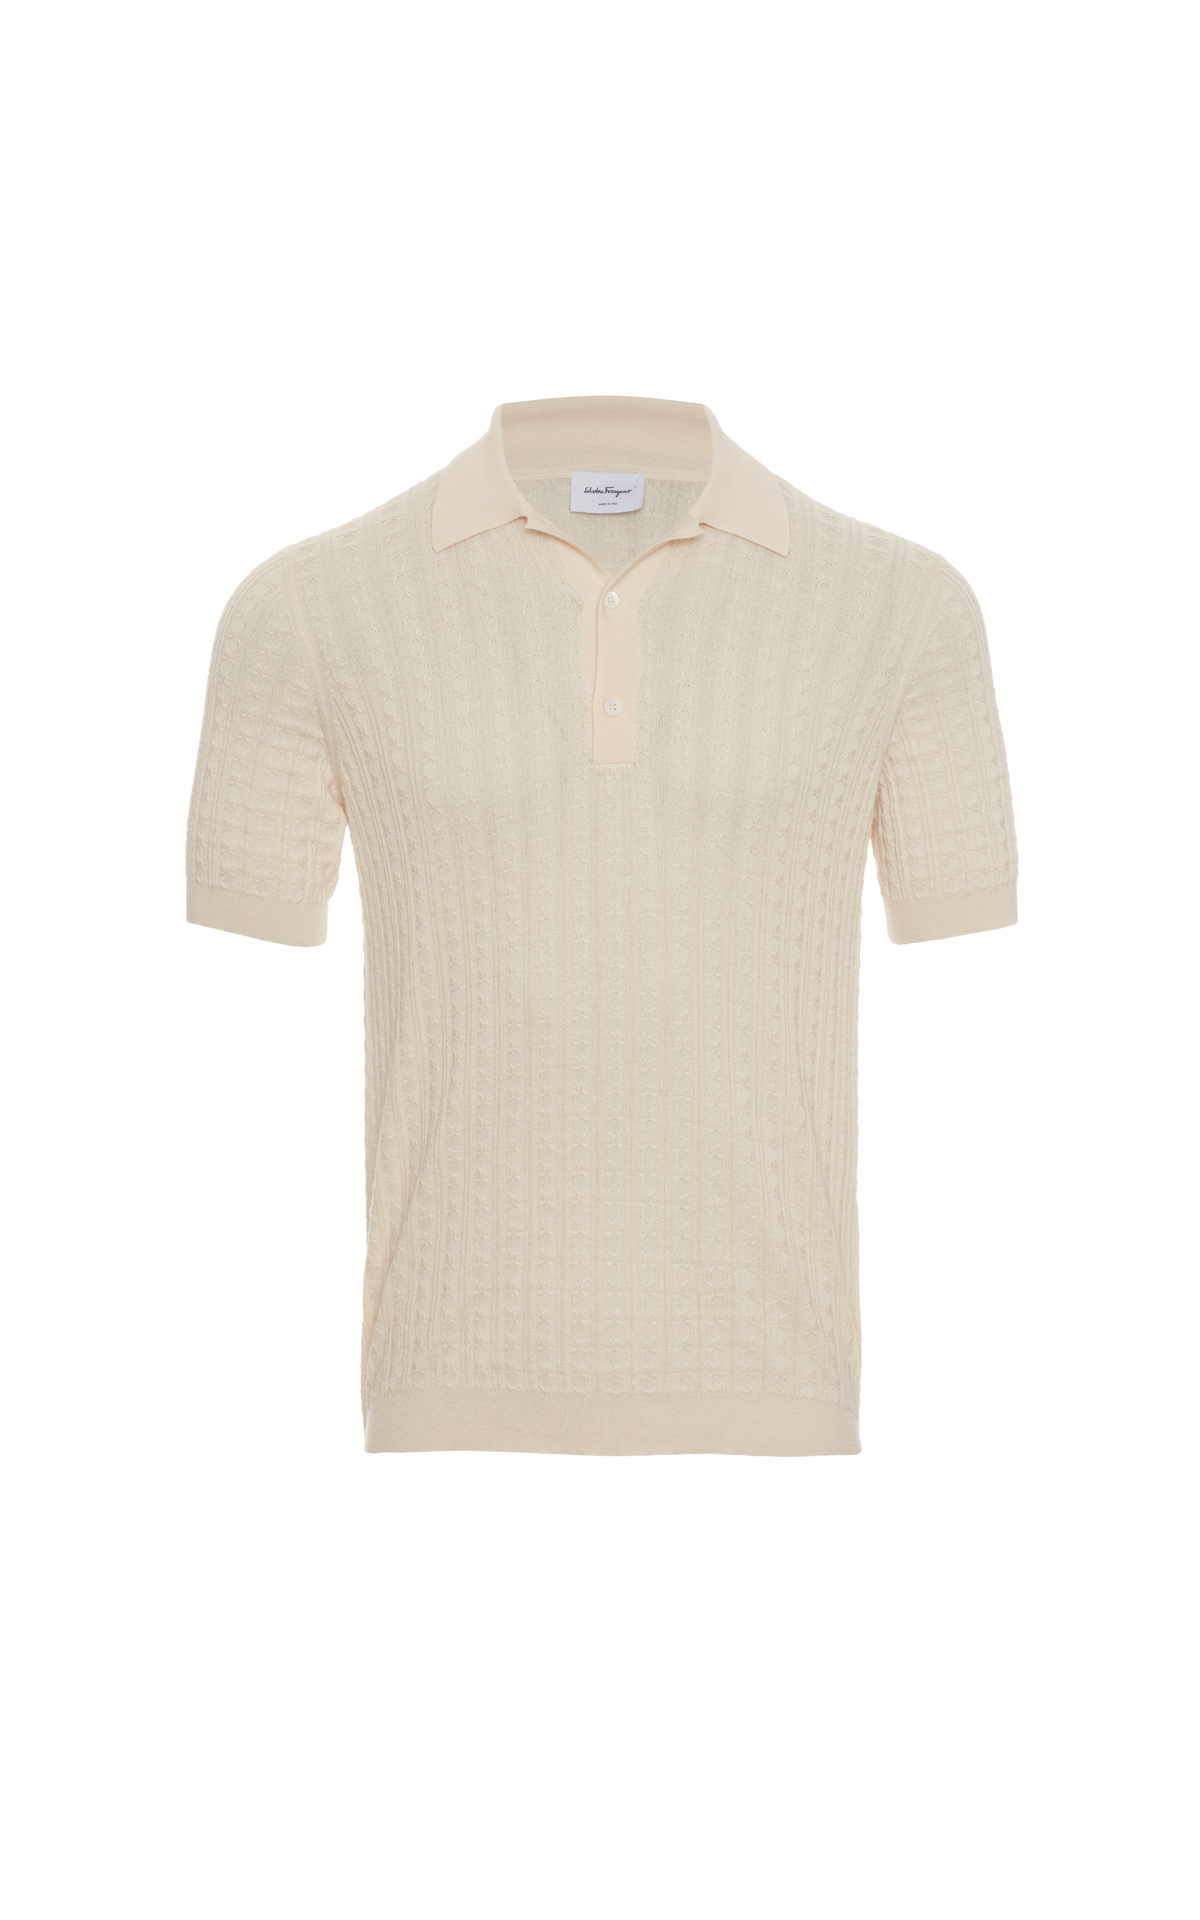 Salvatore Ferragamo Knitted polo off white from Bicester Village